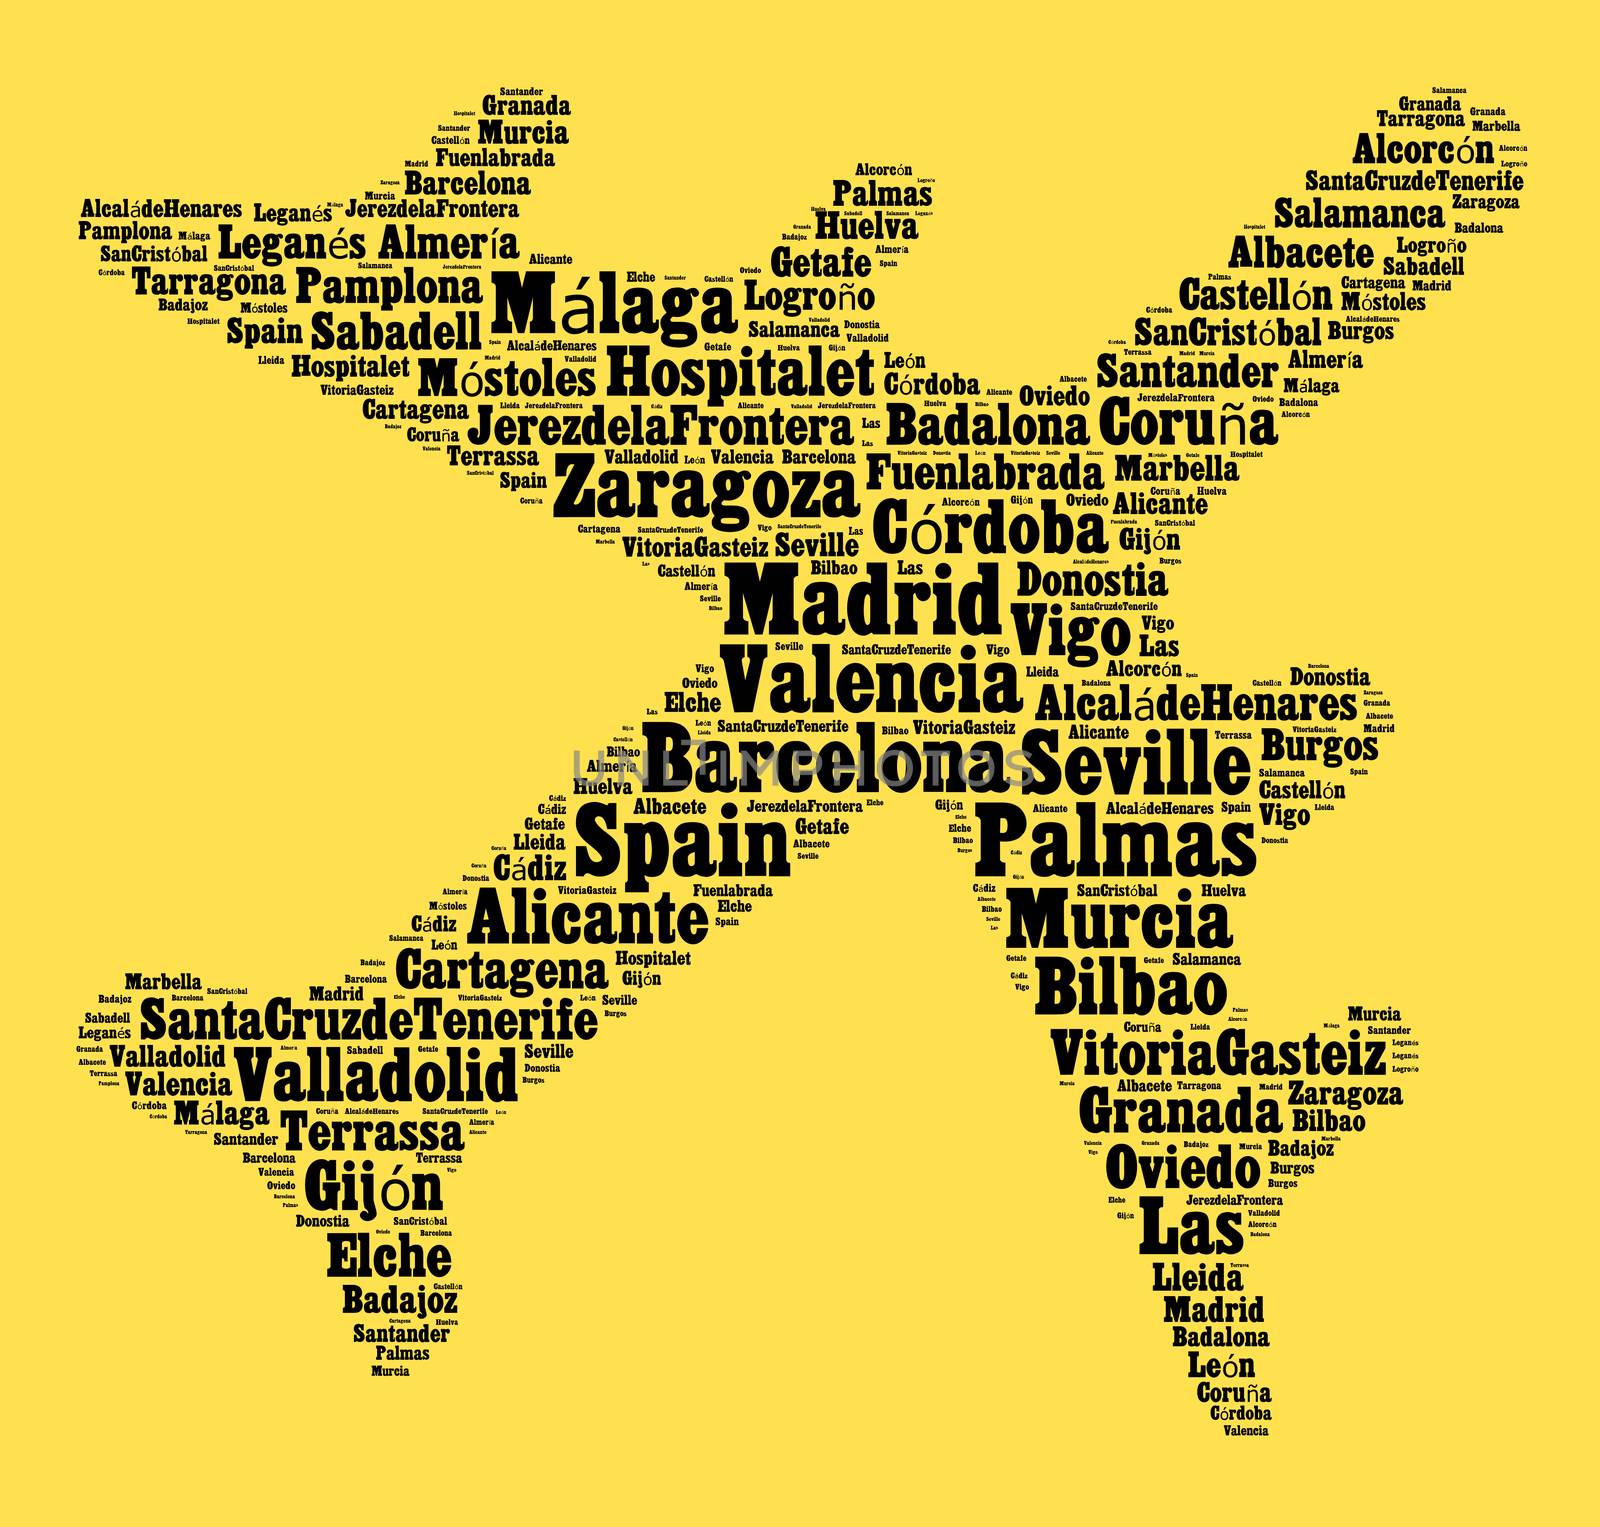 Localities in Spain word cloud concept over airplane shape